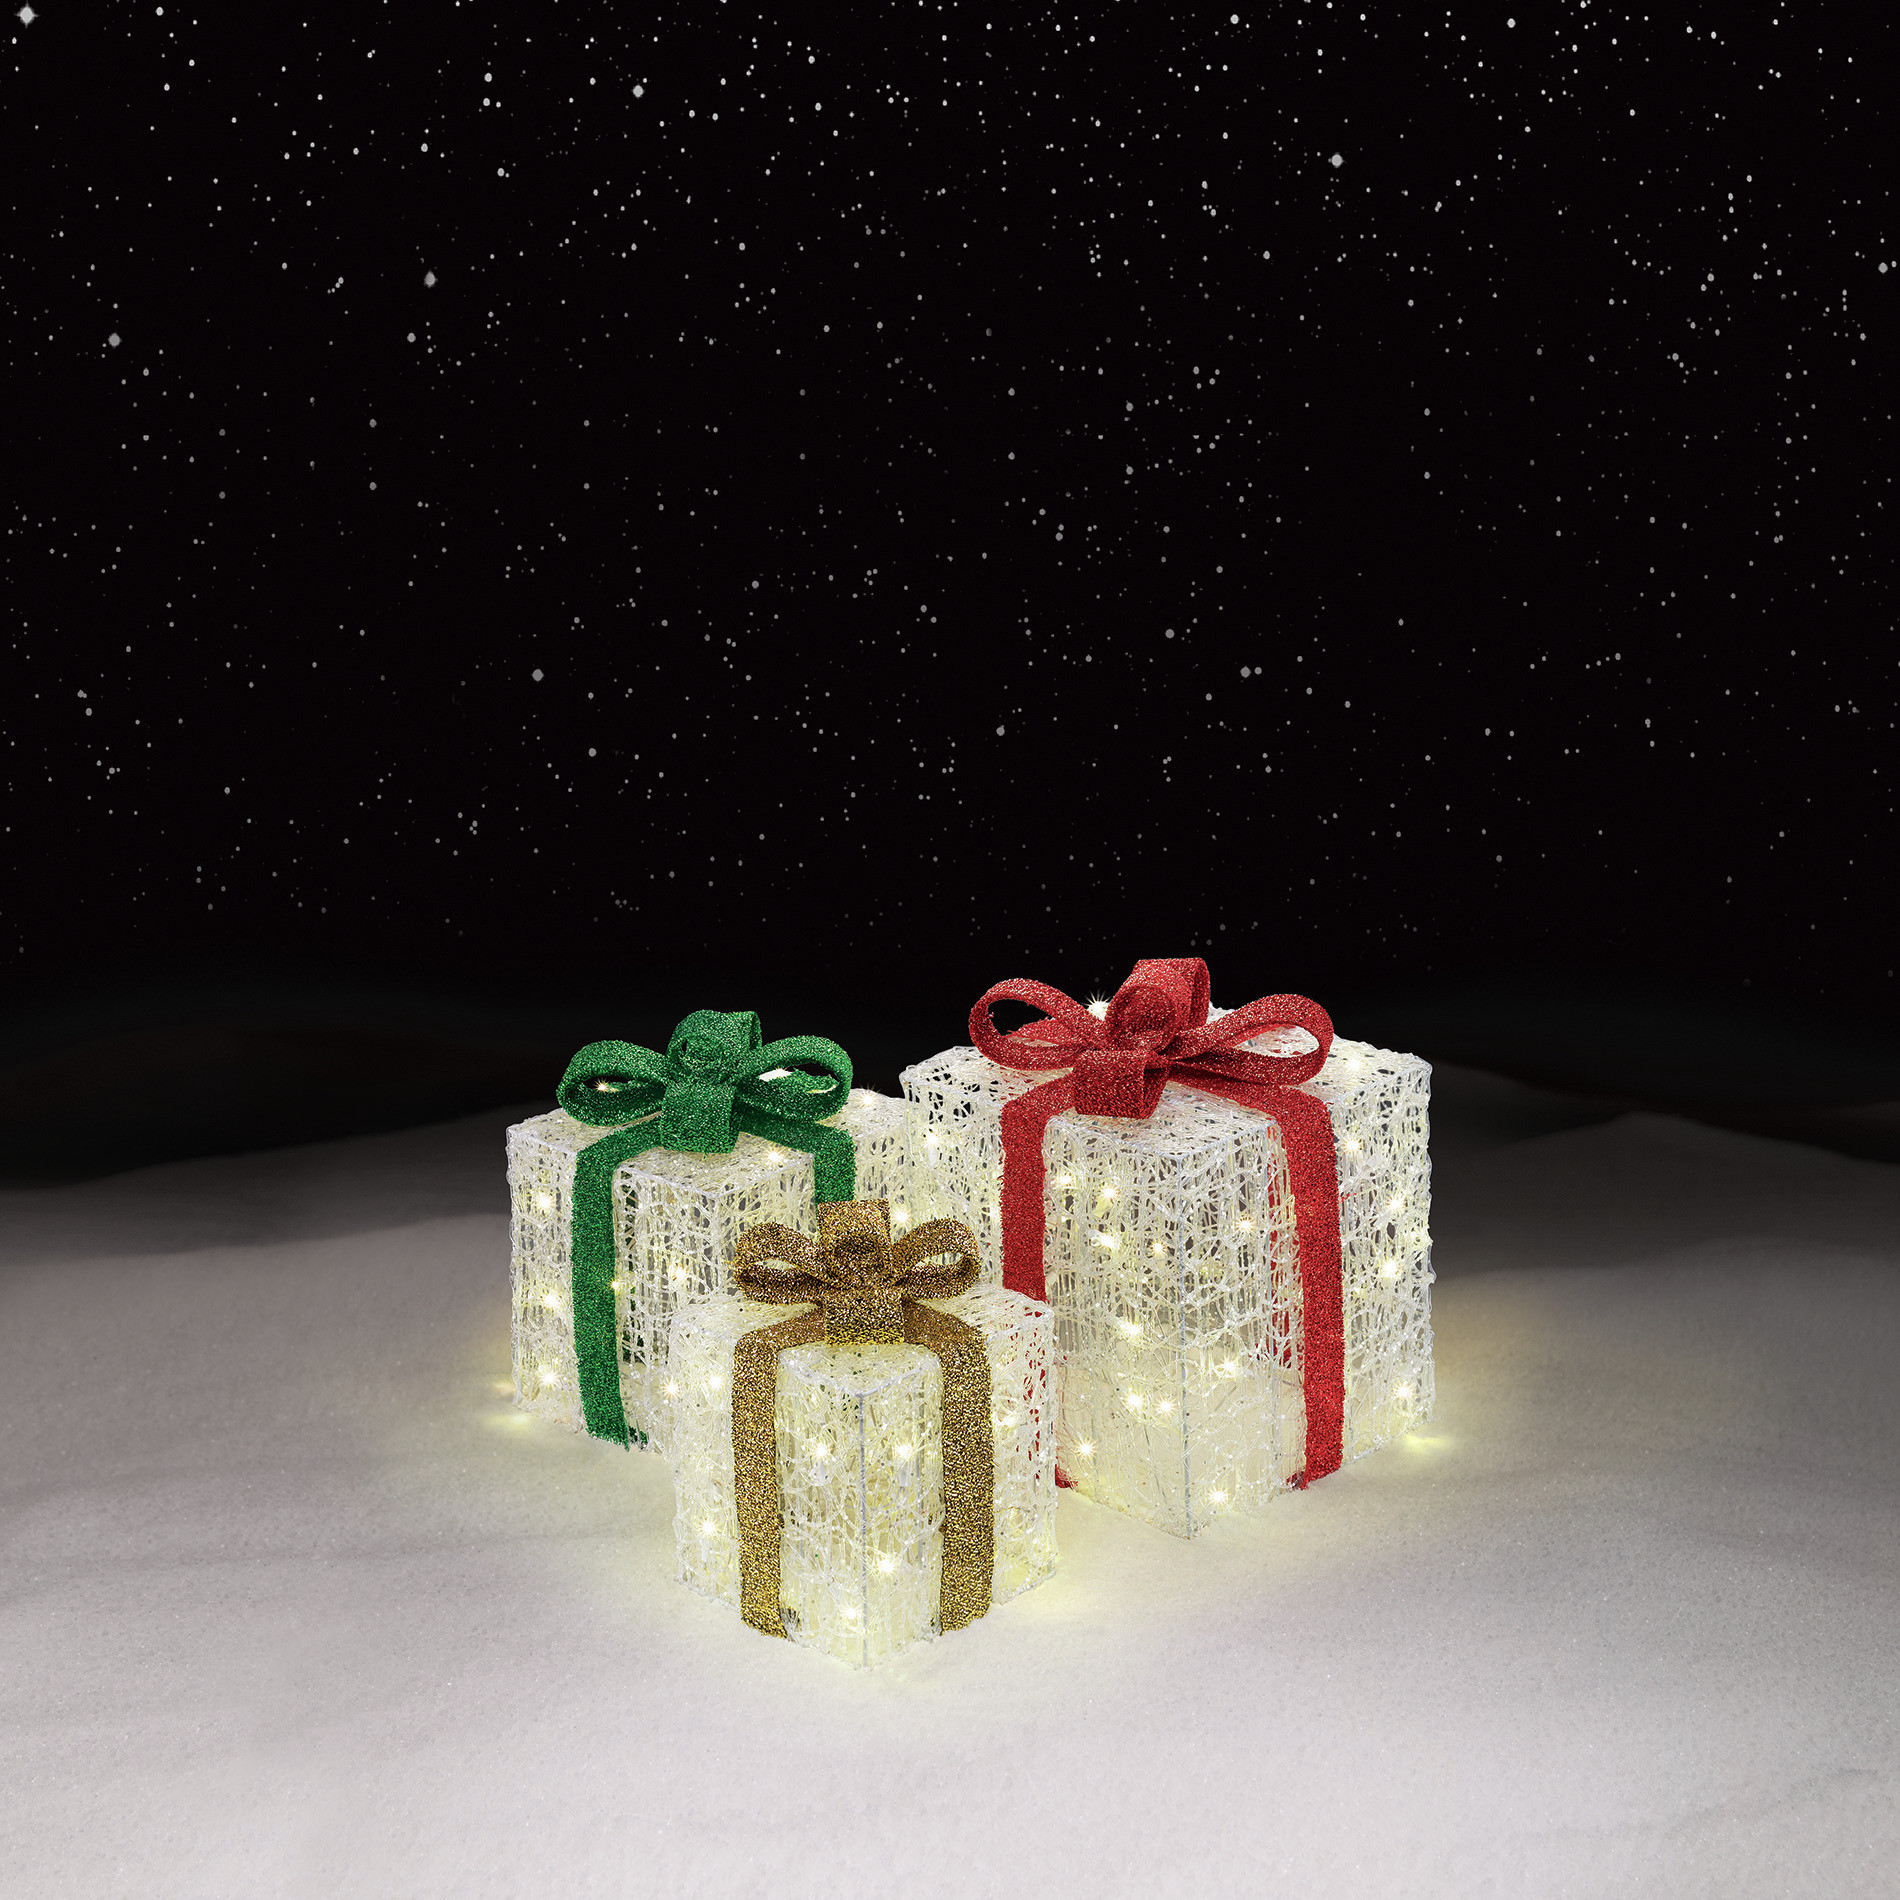 Outdoor Christmas Present Decorations
 3 Light Up Gift Box Decorations Cheerful Holiday